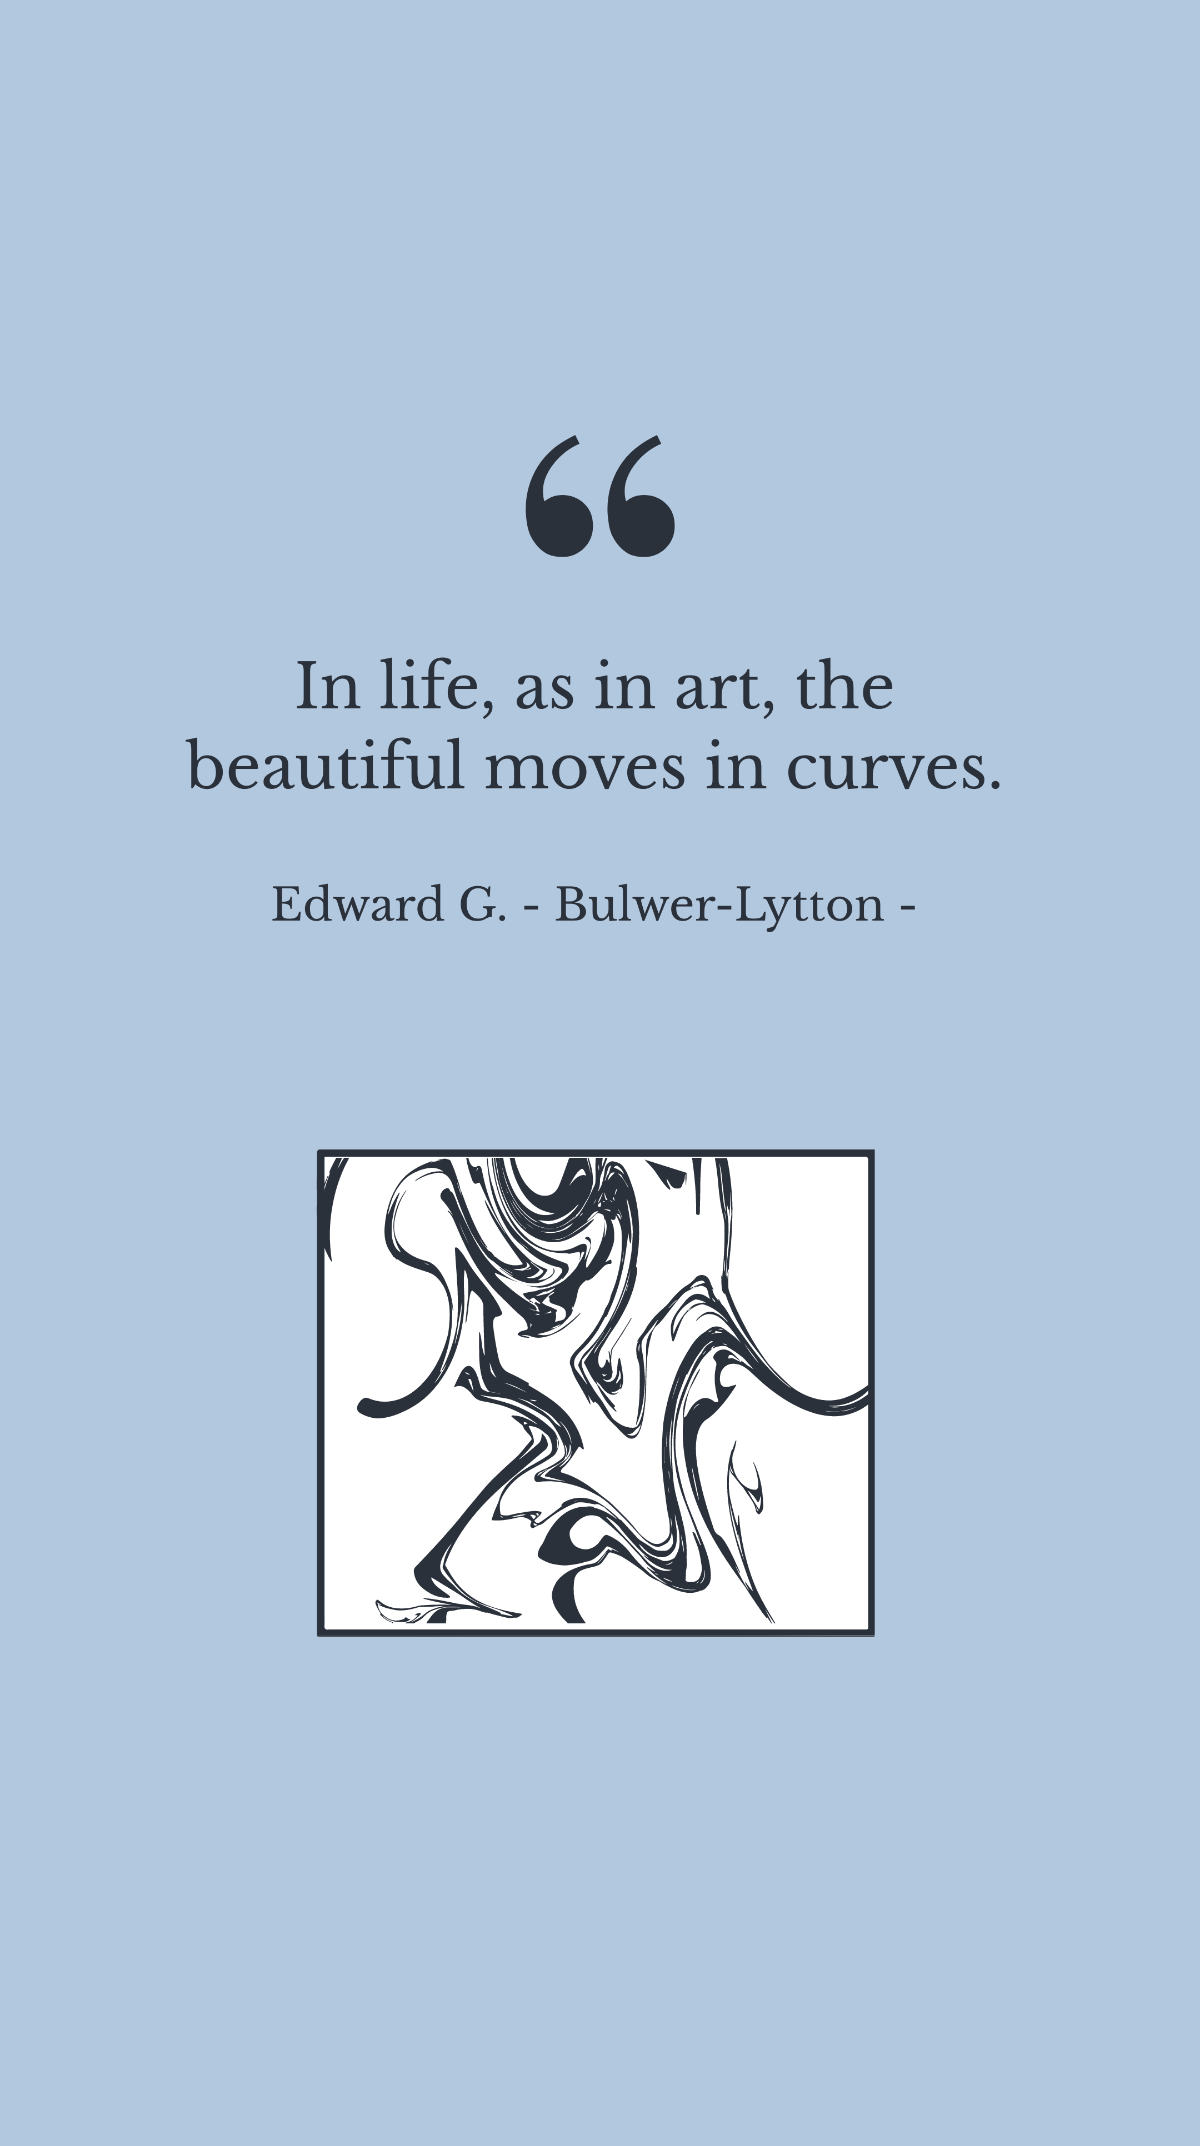 Edward G. - Bulwer-Lytton - In life, as in art, the beautiful moves in curves.